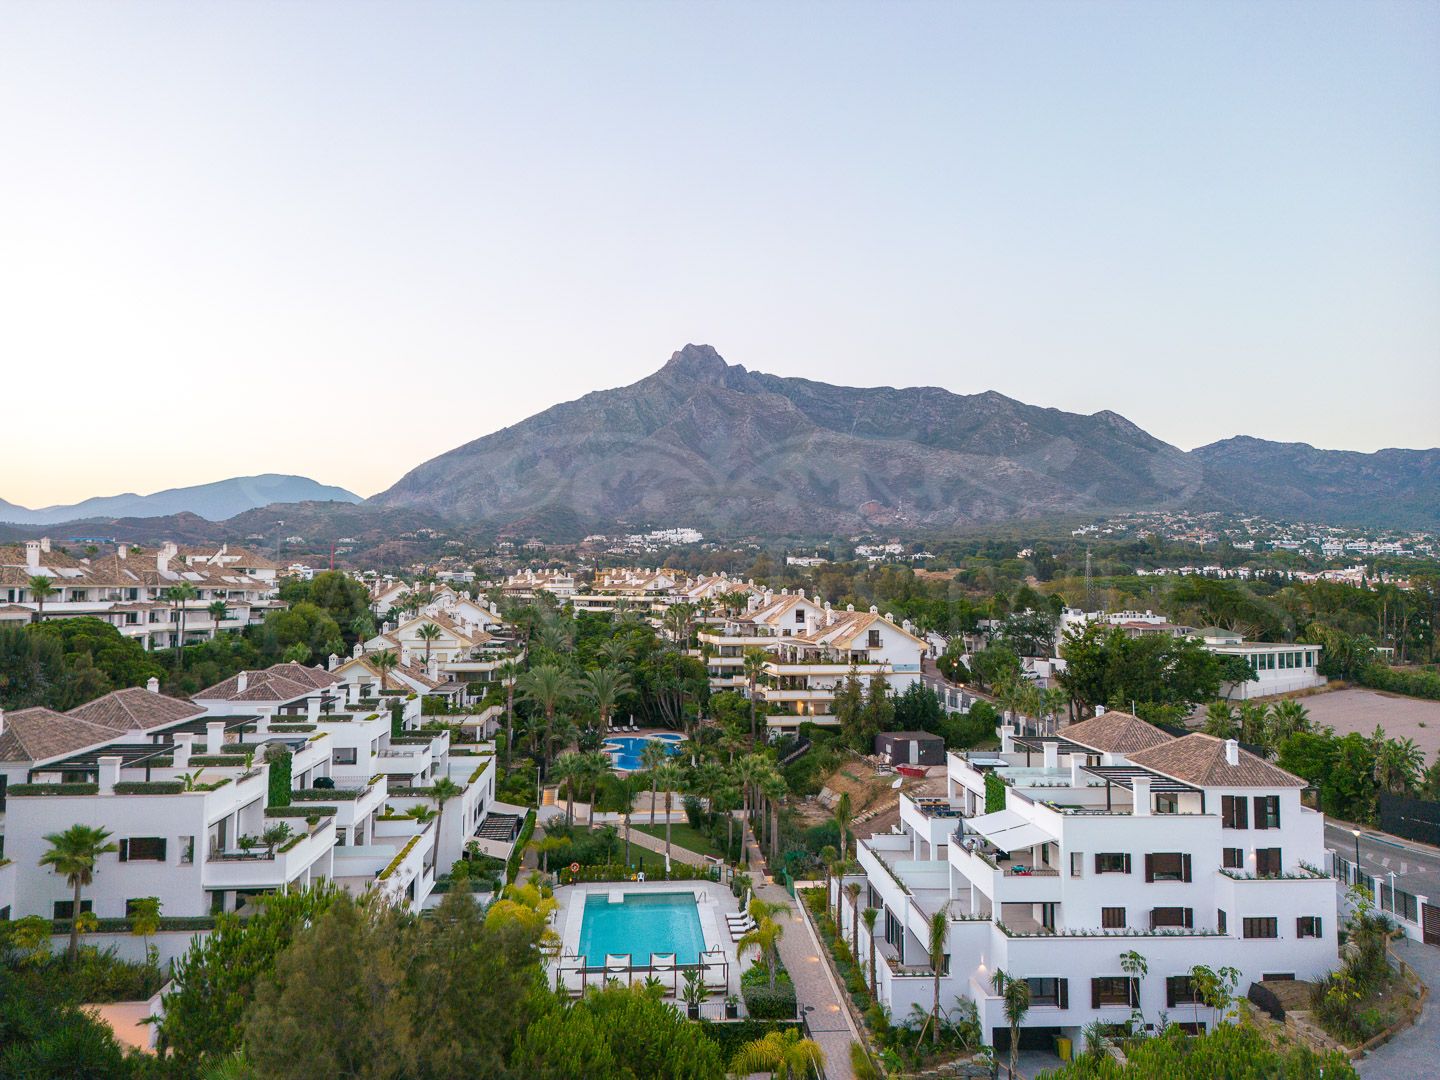 Brand new duplex penthouse in the Golden Mile of Marbella